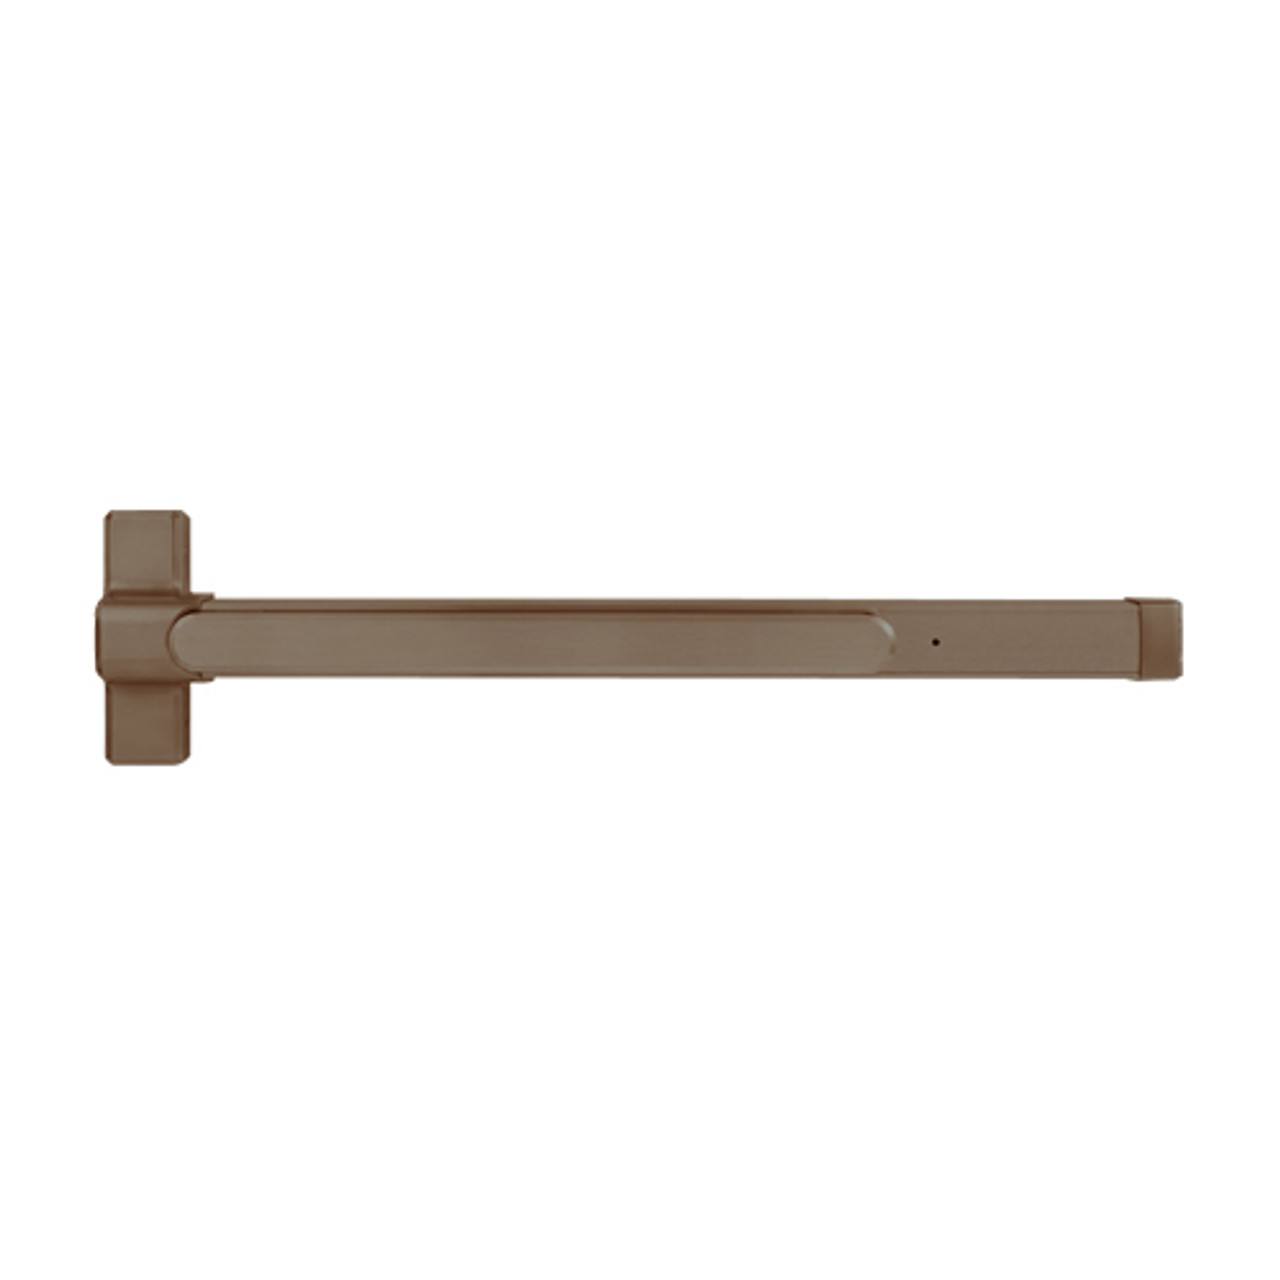 QED127ED-48-7-313AN Stanley QED100 Series Heavy Duty Concealed Vertical Rod Hex Dog Exit Device in Anodized Duranodic Bronze Finish